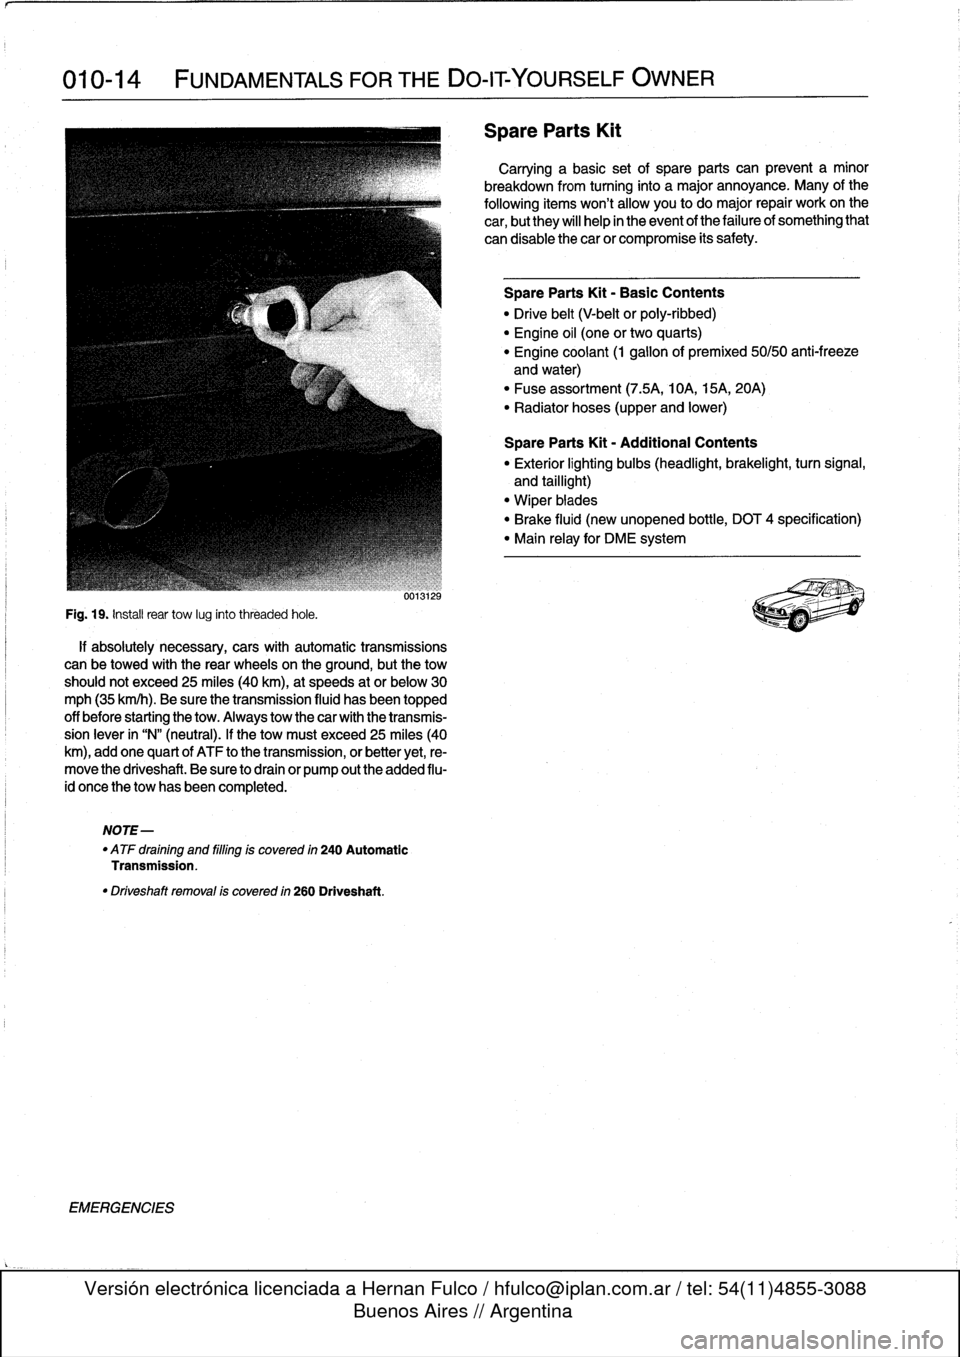 BMW 325i 1994 E36 Workshop Manual 
010-14

	

FUNDAMENTALS
FOR
THE
DO-ITYOURSELF
OWNER

Fig
.
19
.
Instaf
rear
tow
lug
into
threaded
hole
.

if
absolutely
necessary,
cars
with
automatic
transmissions
can
be
towed
with
the
rear
wheels
